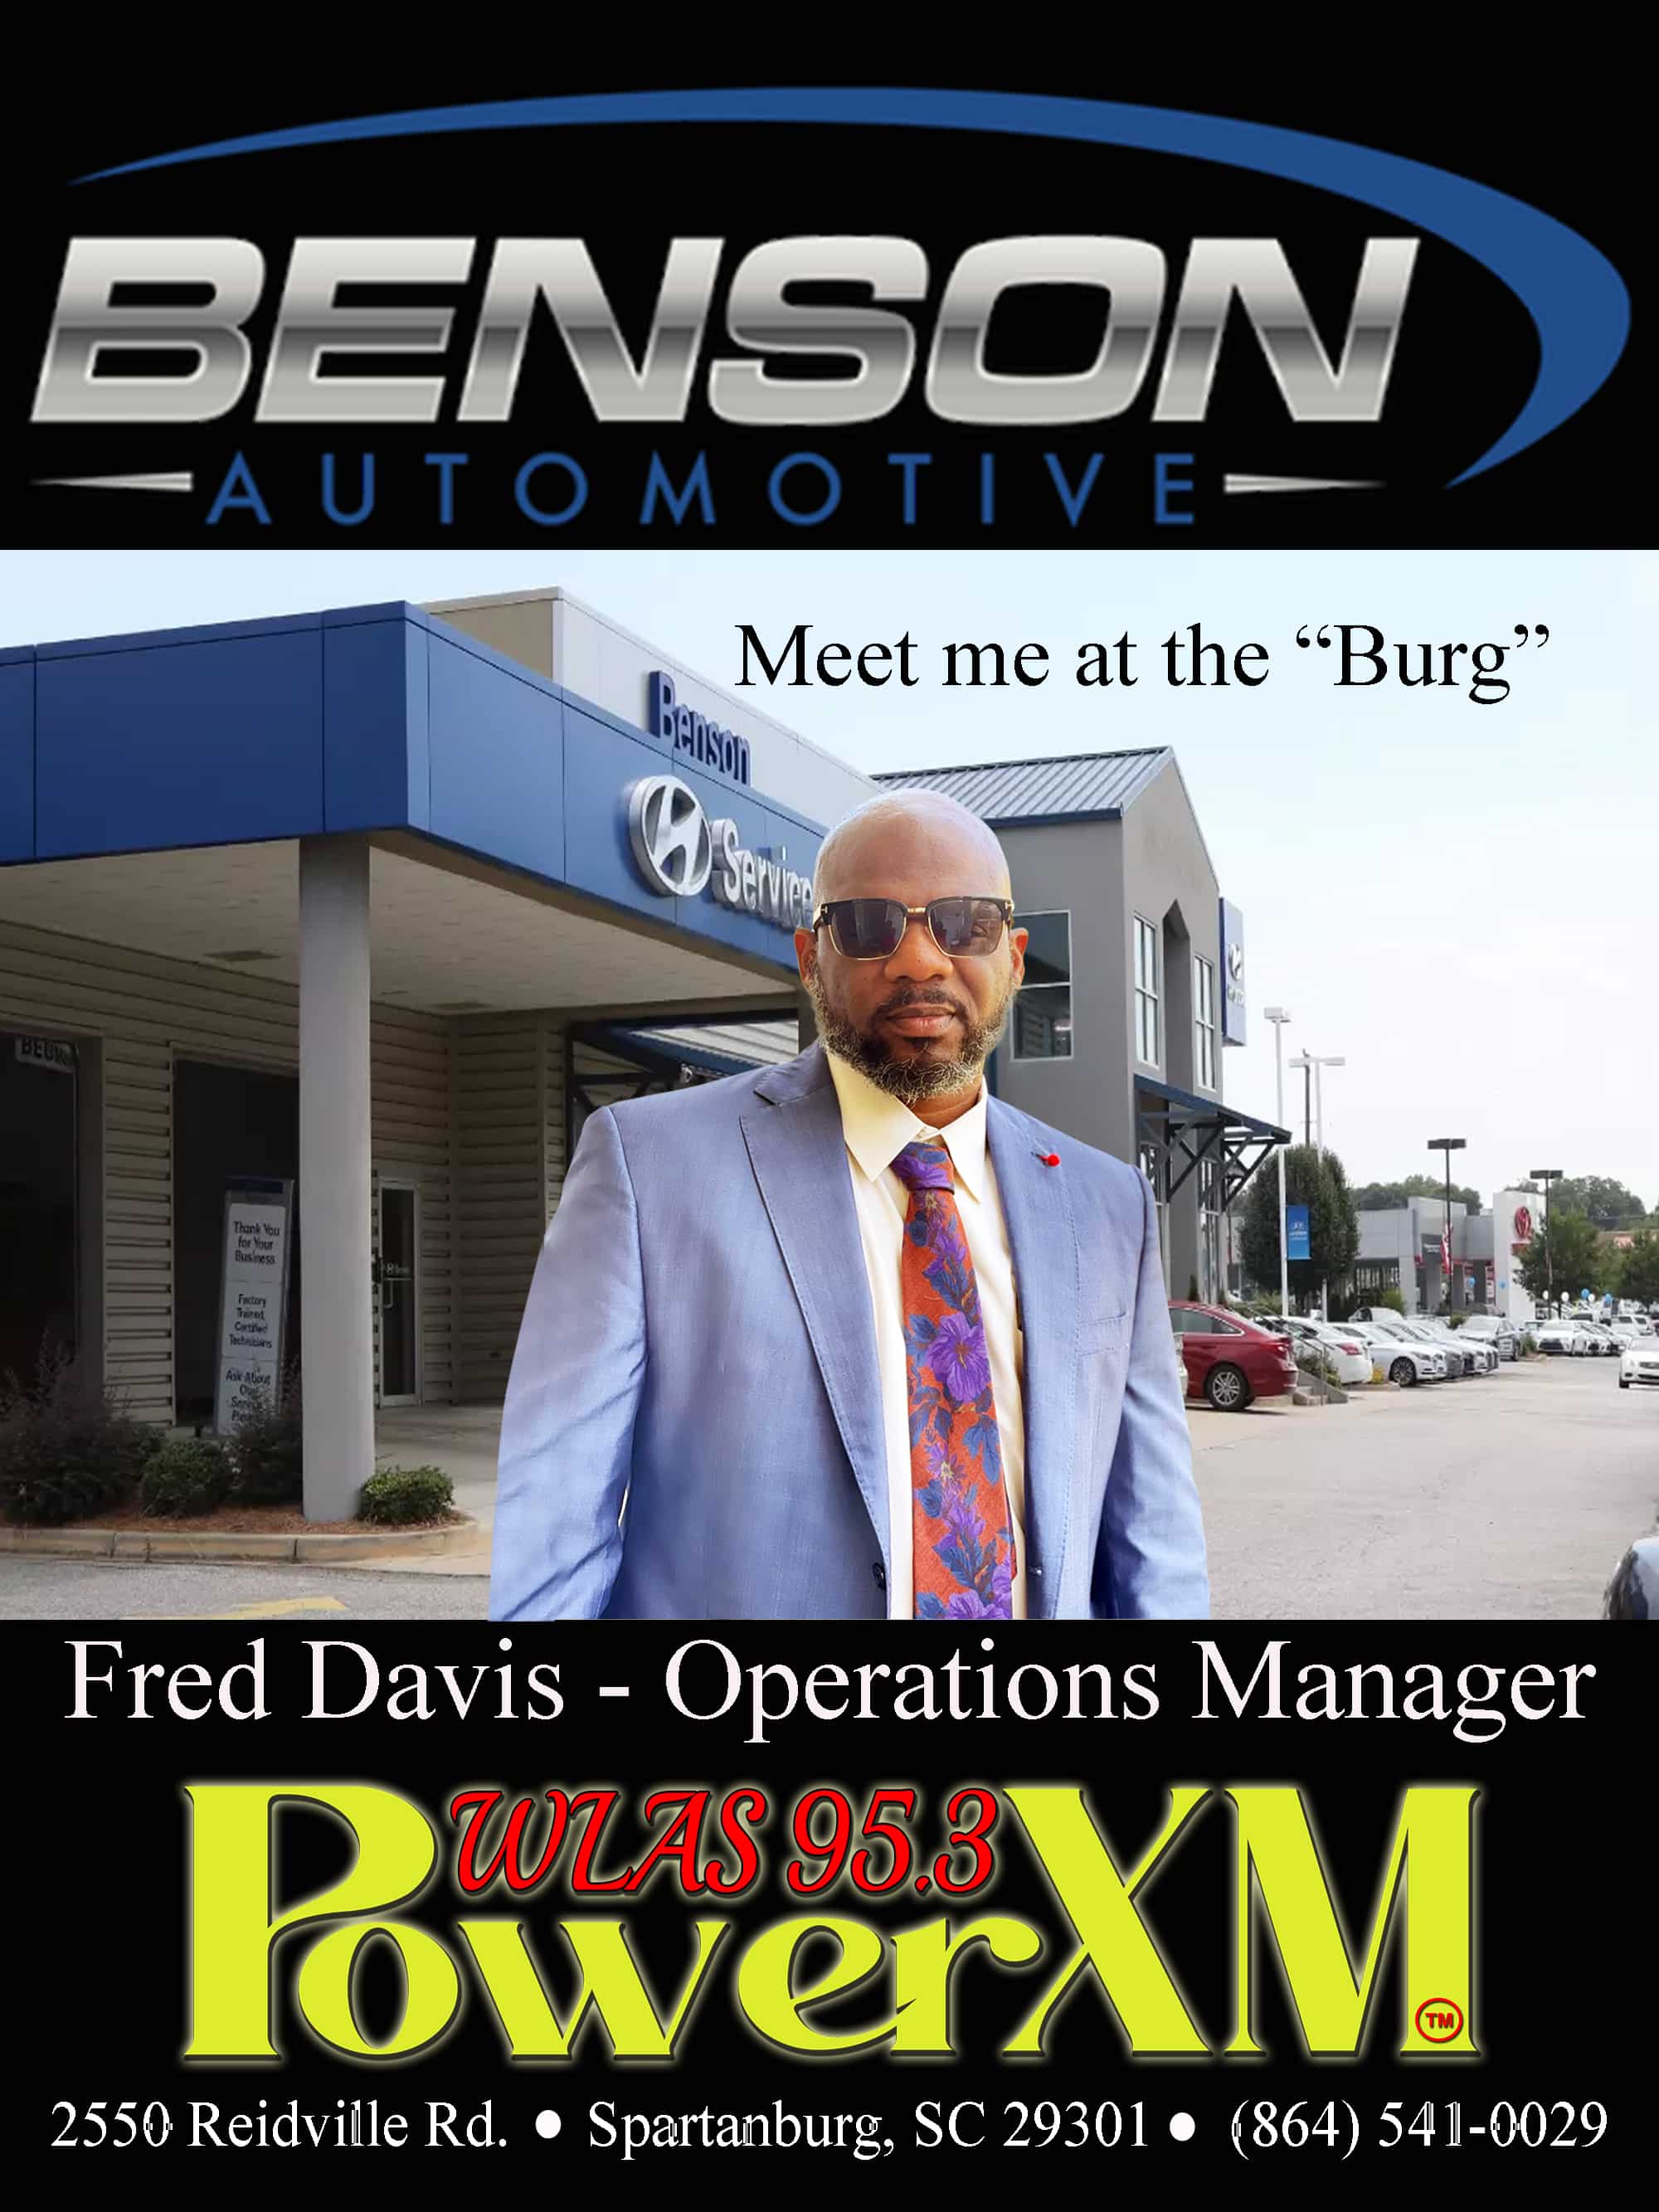 Operations Manager Fred Davis